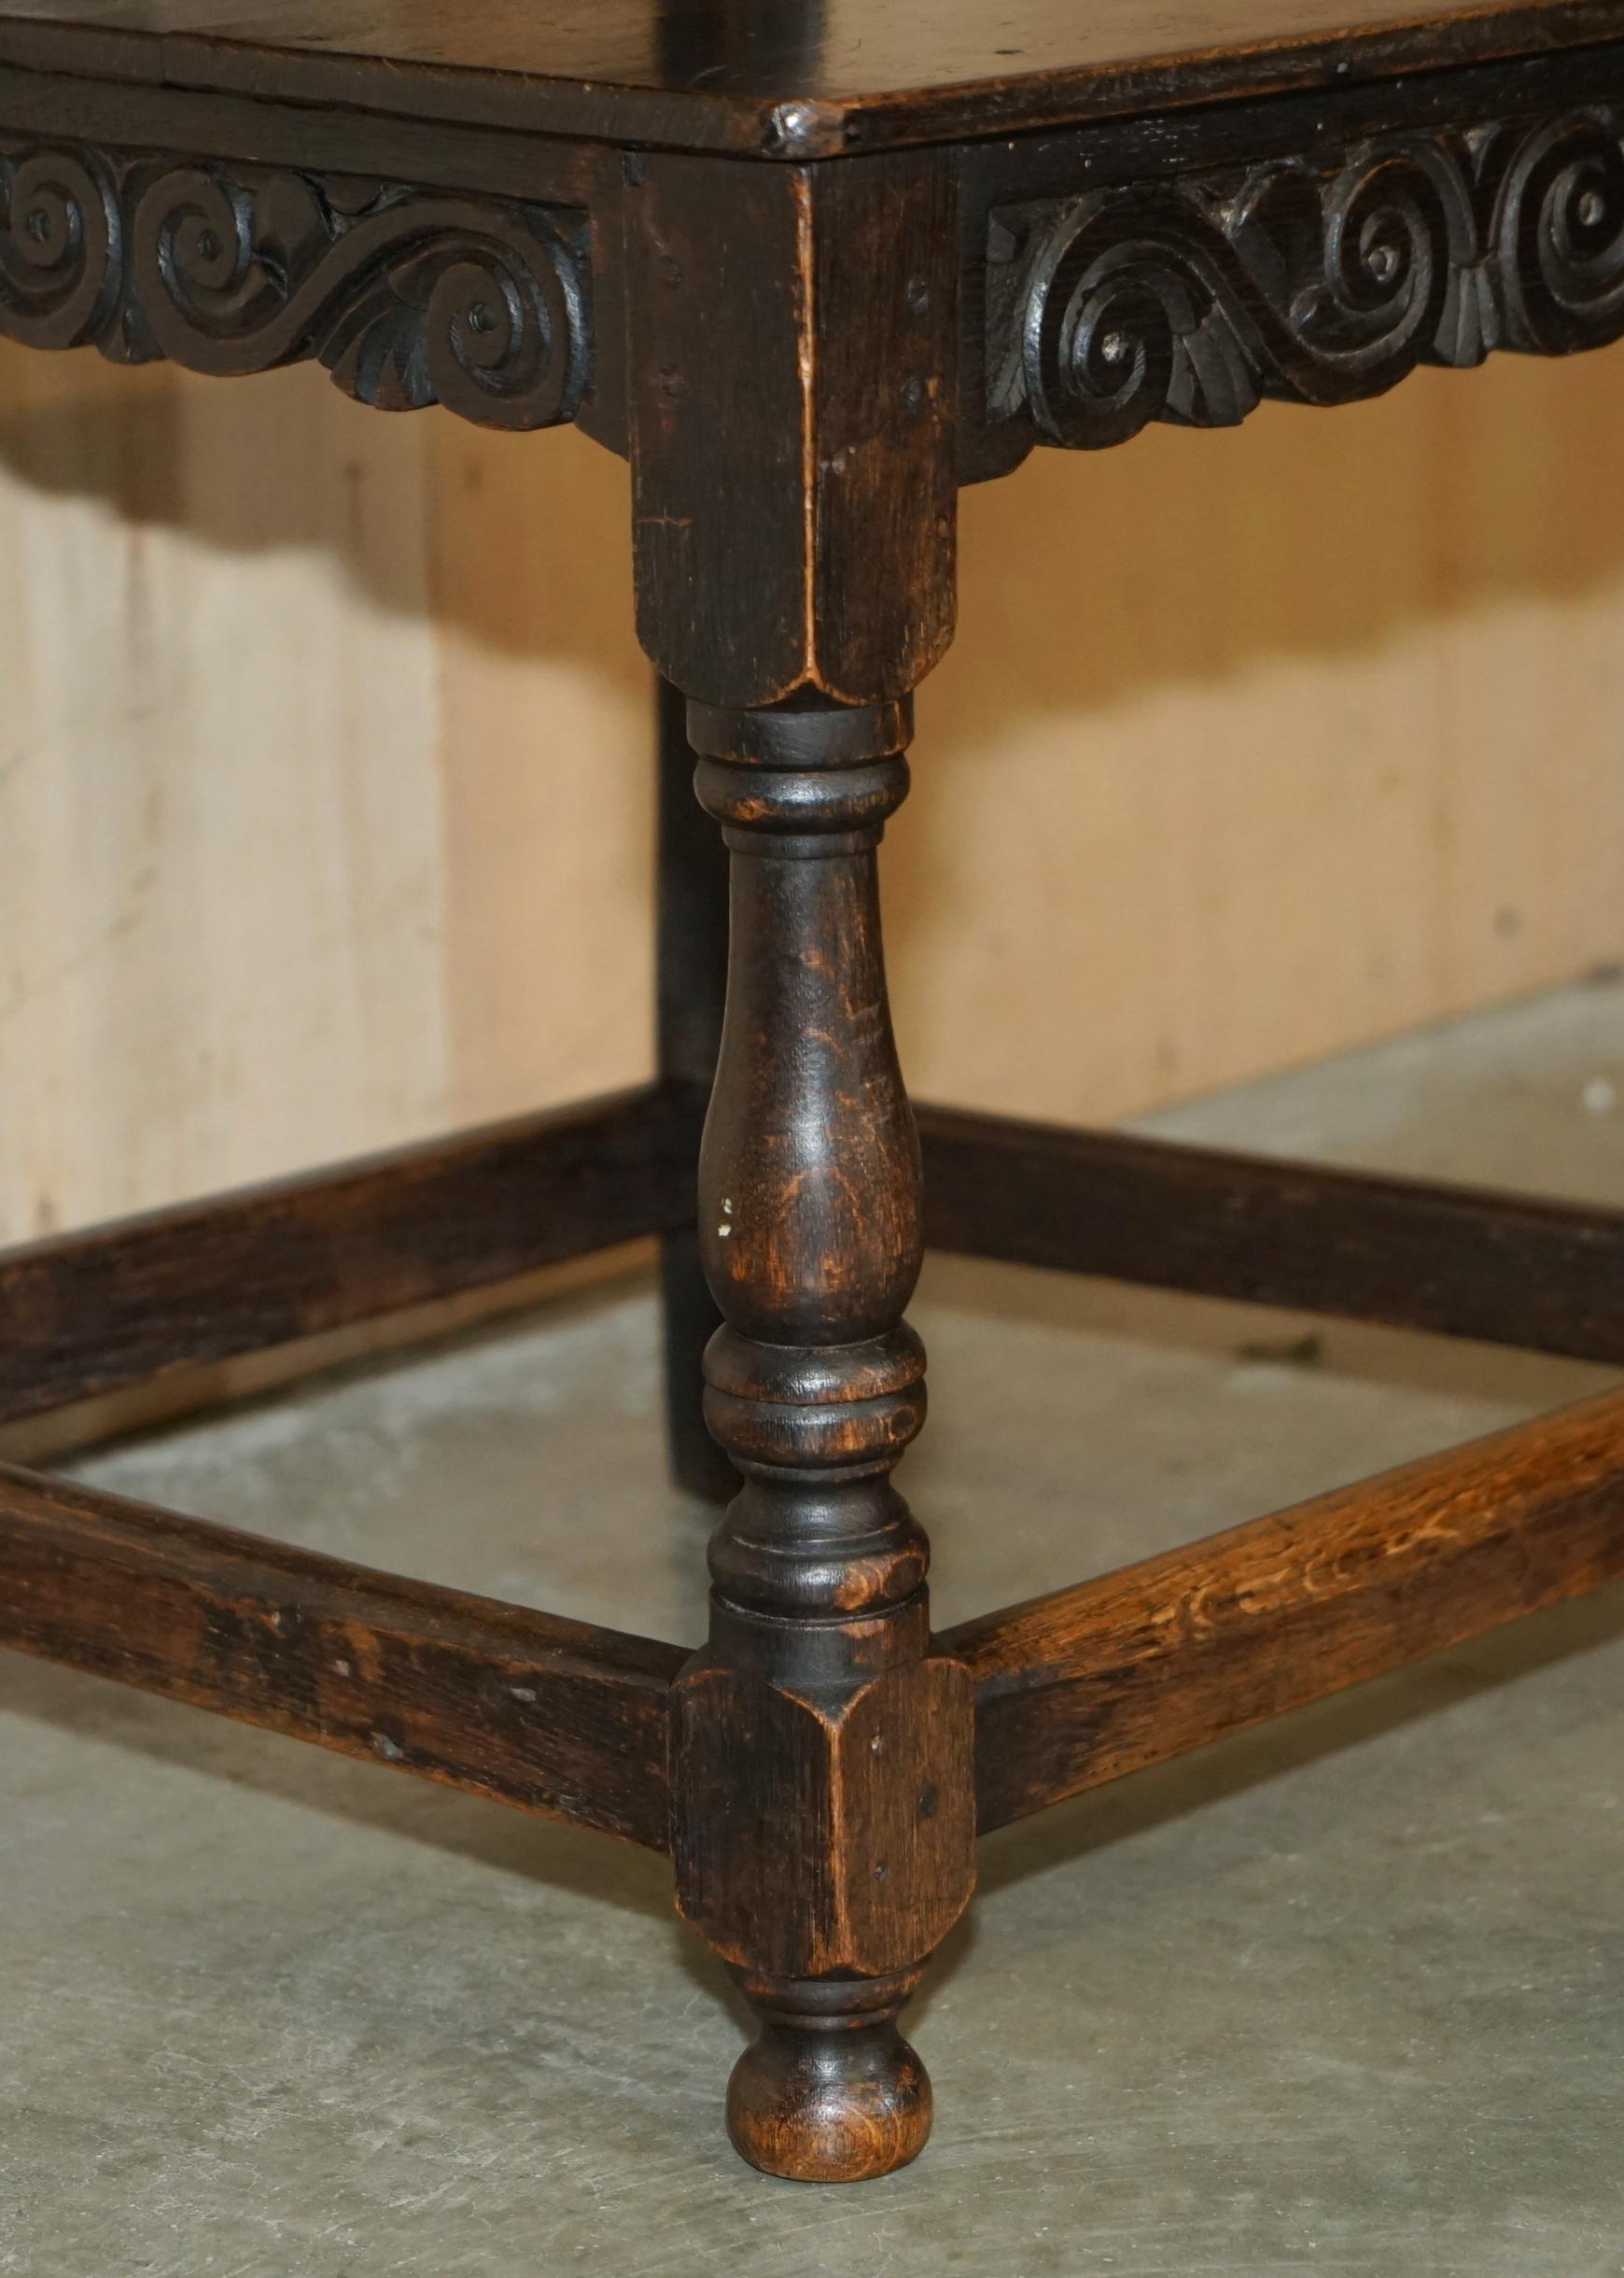 ANTIQUE PAIR OF 17TH CENTURY JACOBEAN ENGLISH OAK CHAIRS FROM THE FILM HELLBOy im Angebot 5